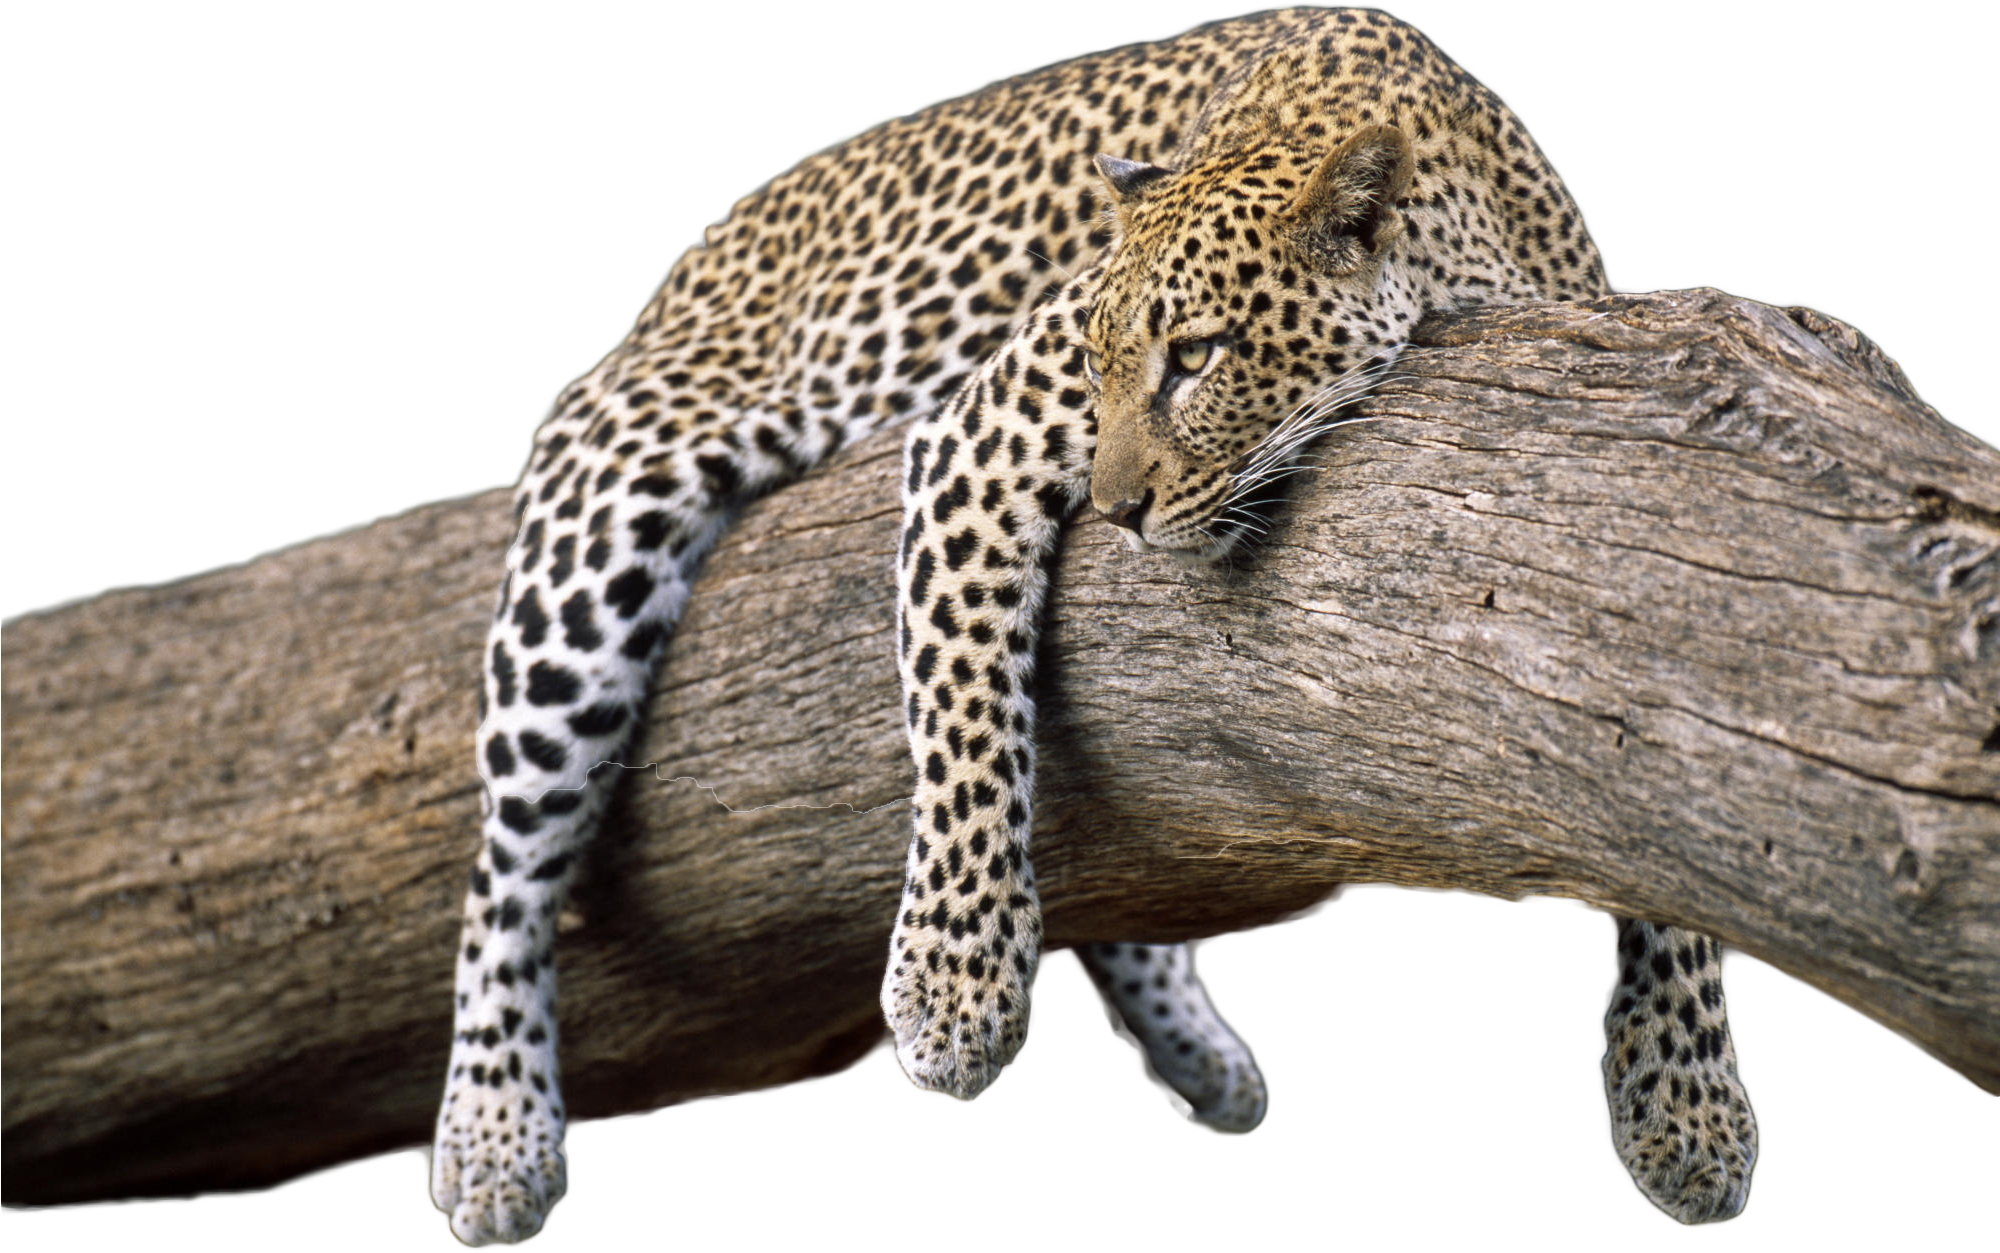 Fz/76, Pictures Sorted, Leopards - Leopard On Tree Branch (1999x1333)